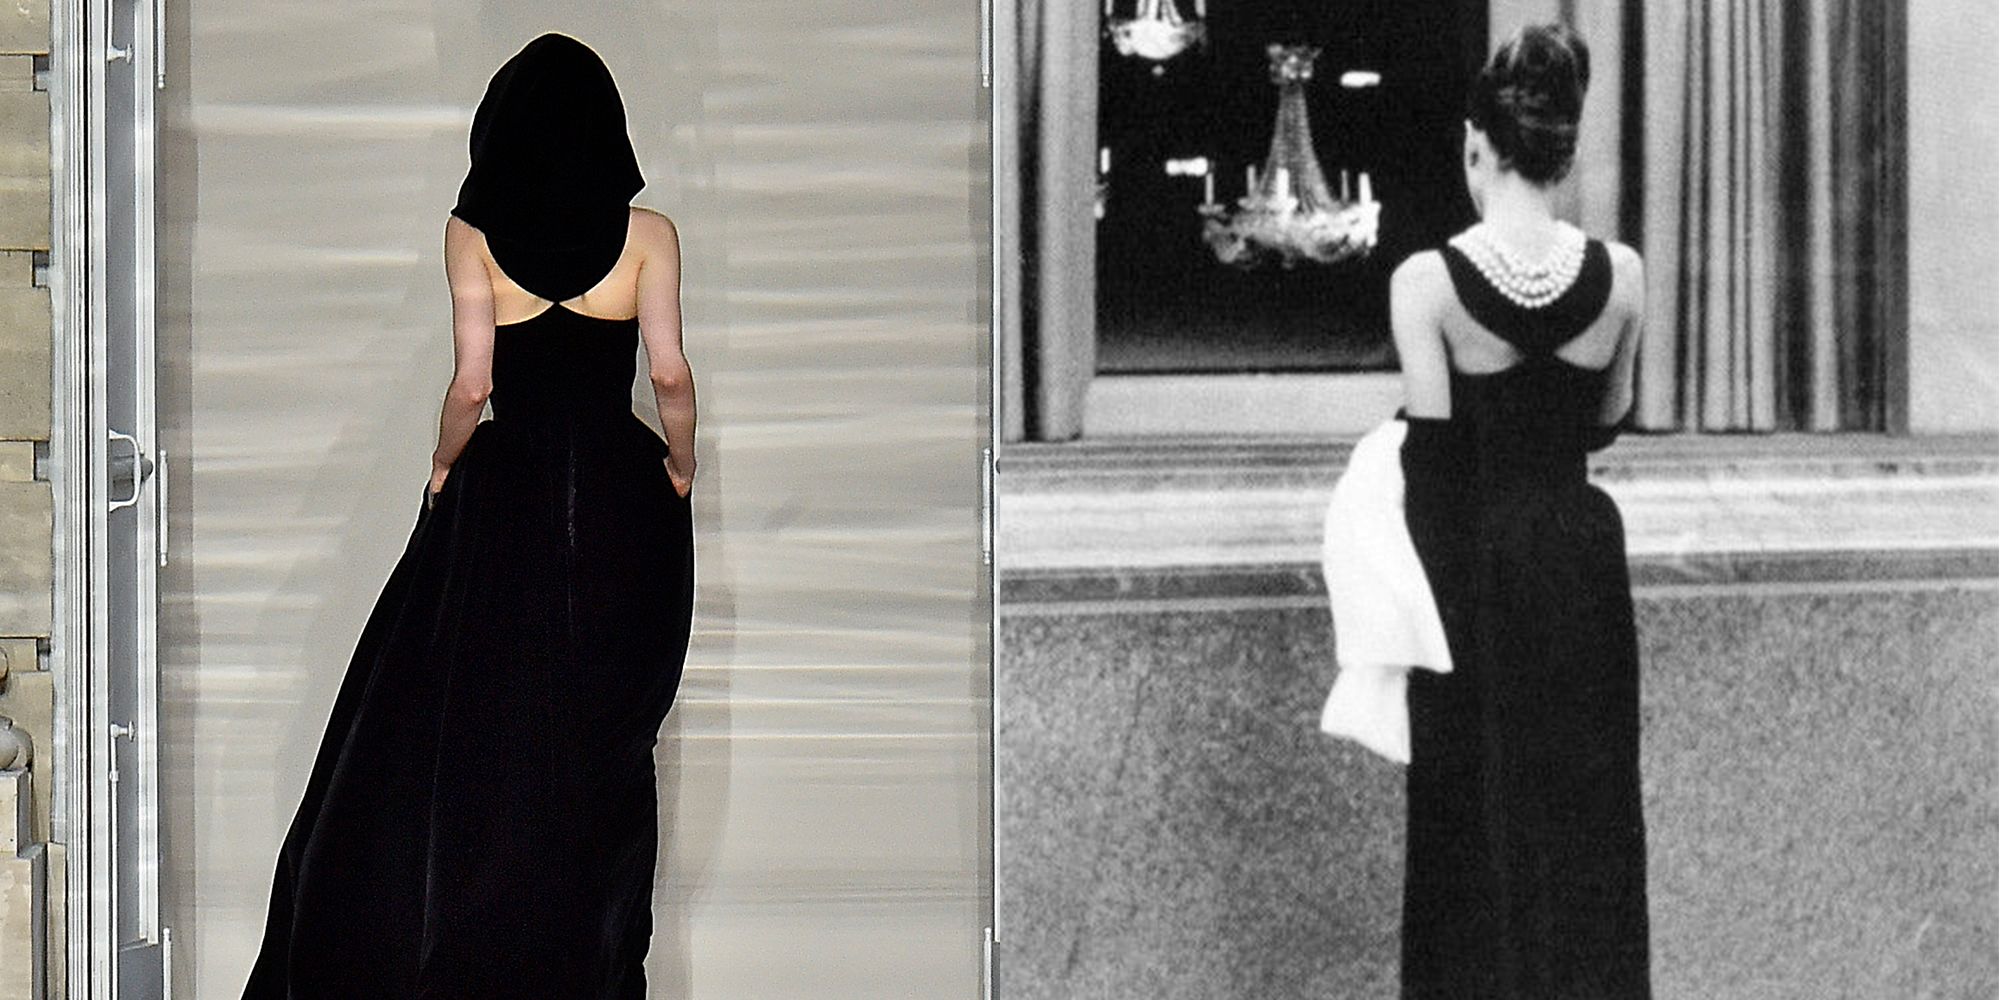 Vintage Clothing History Guide - The Little Black Dress